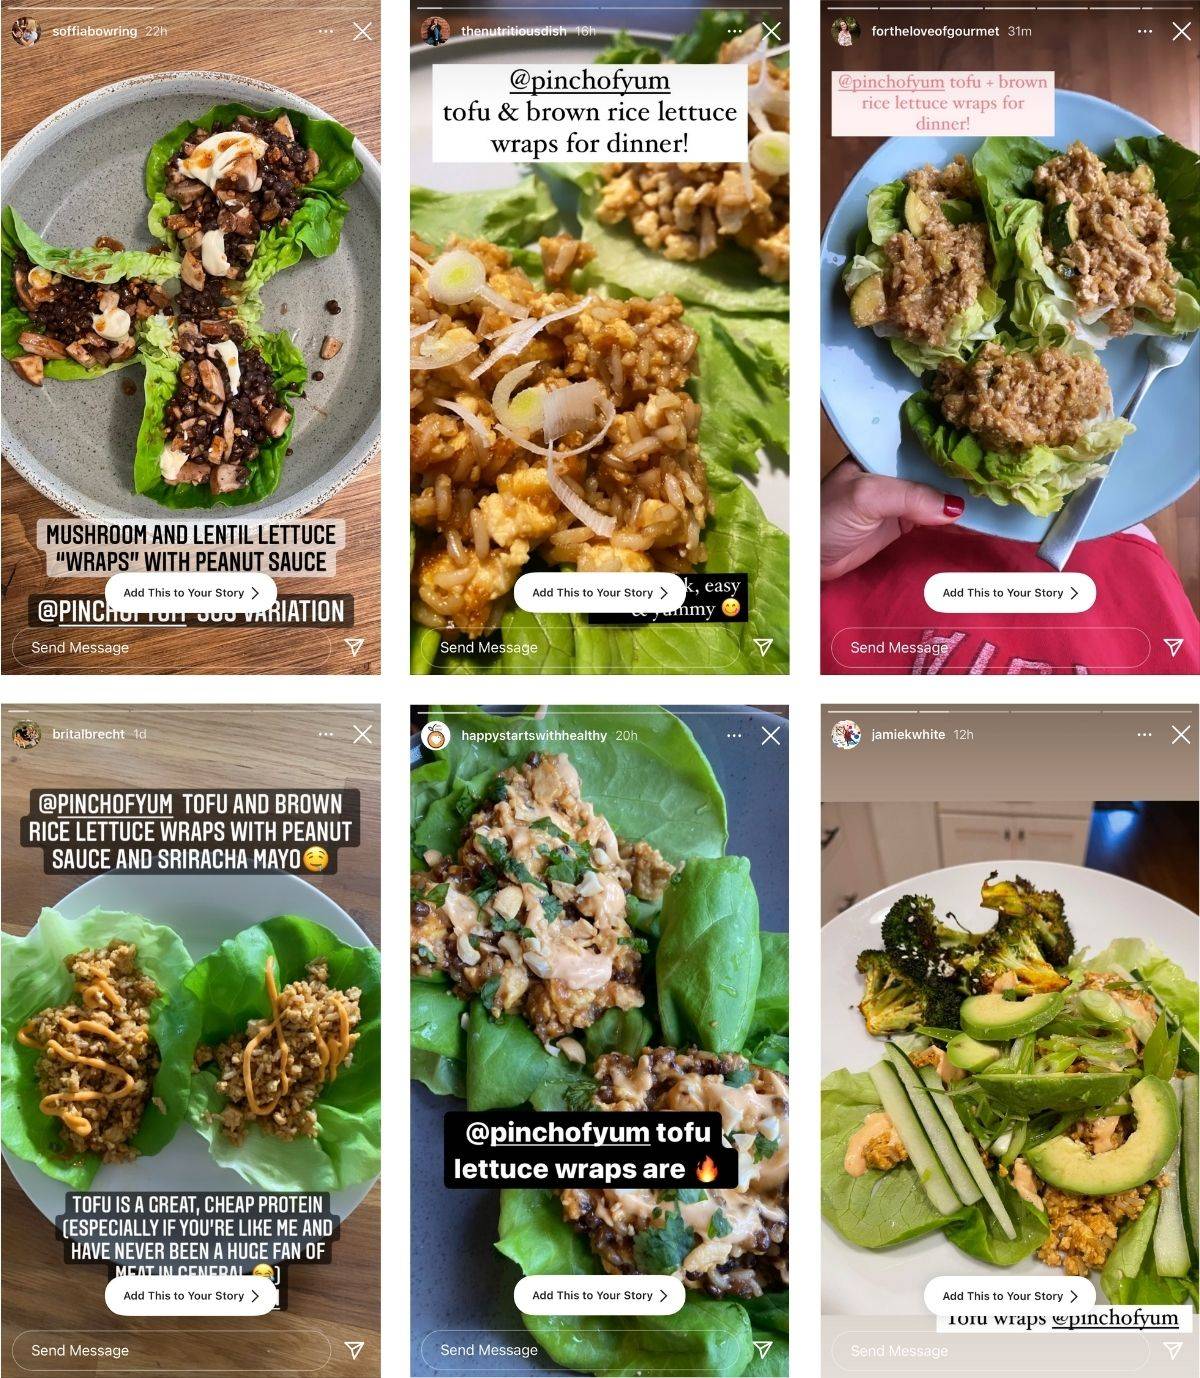 Reader images from the Tofu and Brown Rice Lettuce Wraps with Peanut Sauce recipe.